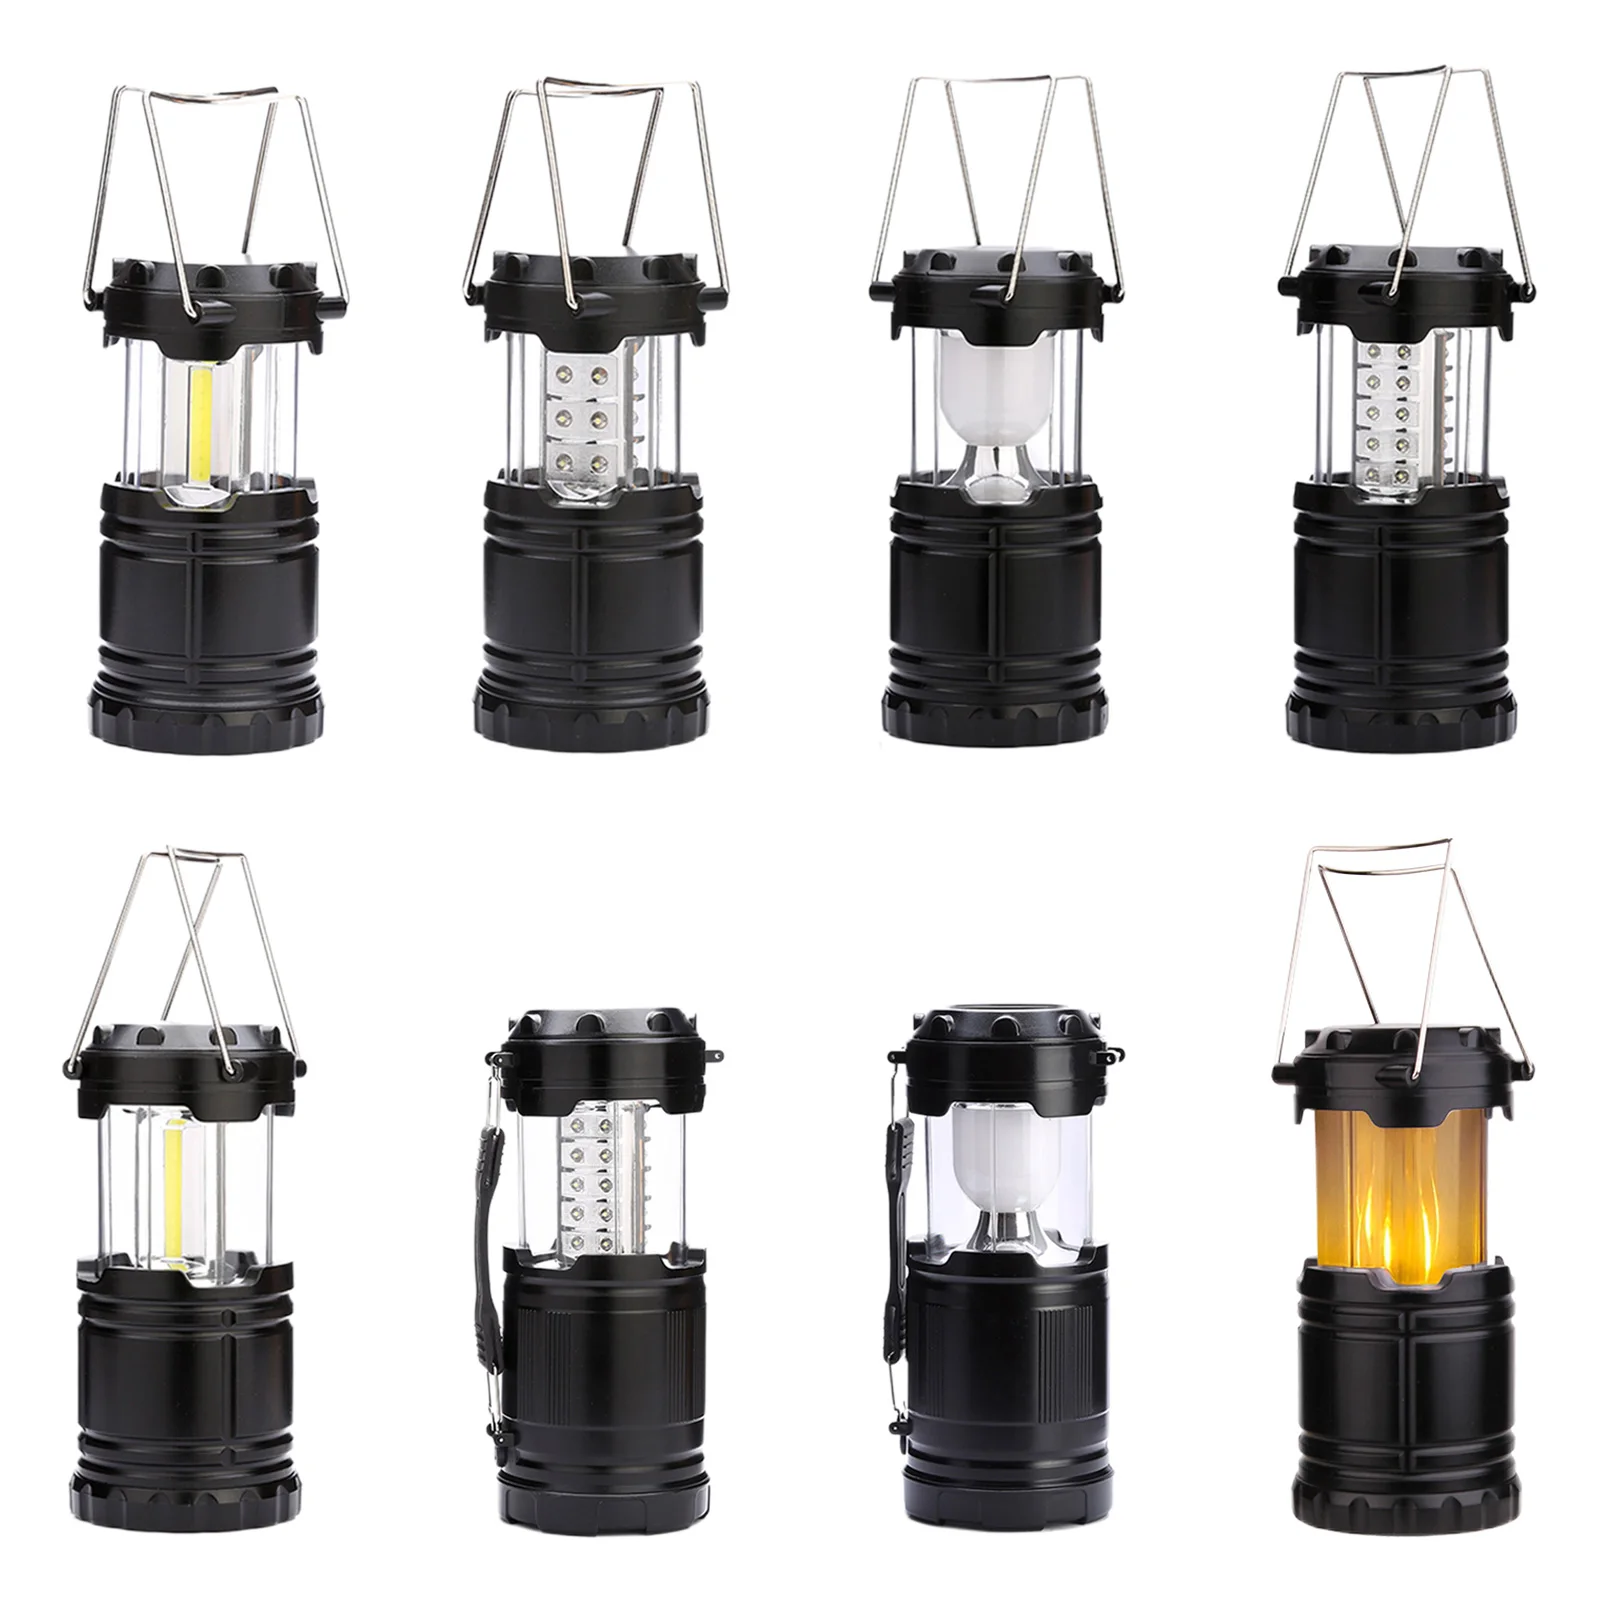 https://ae01.alicdn.com/kf/S59ff228e456b4cc8b0f89fb9294db9627/Portable-COB-LED-Camping-Light-Collapsible-Camping-Lantern-Hanging-Tent-Flashlight-Lights-for-Outdoor-Camping-Hiking.jpg